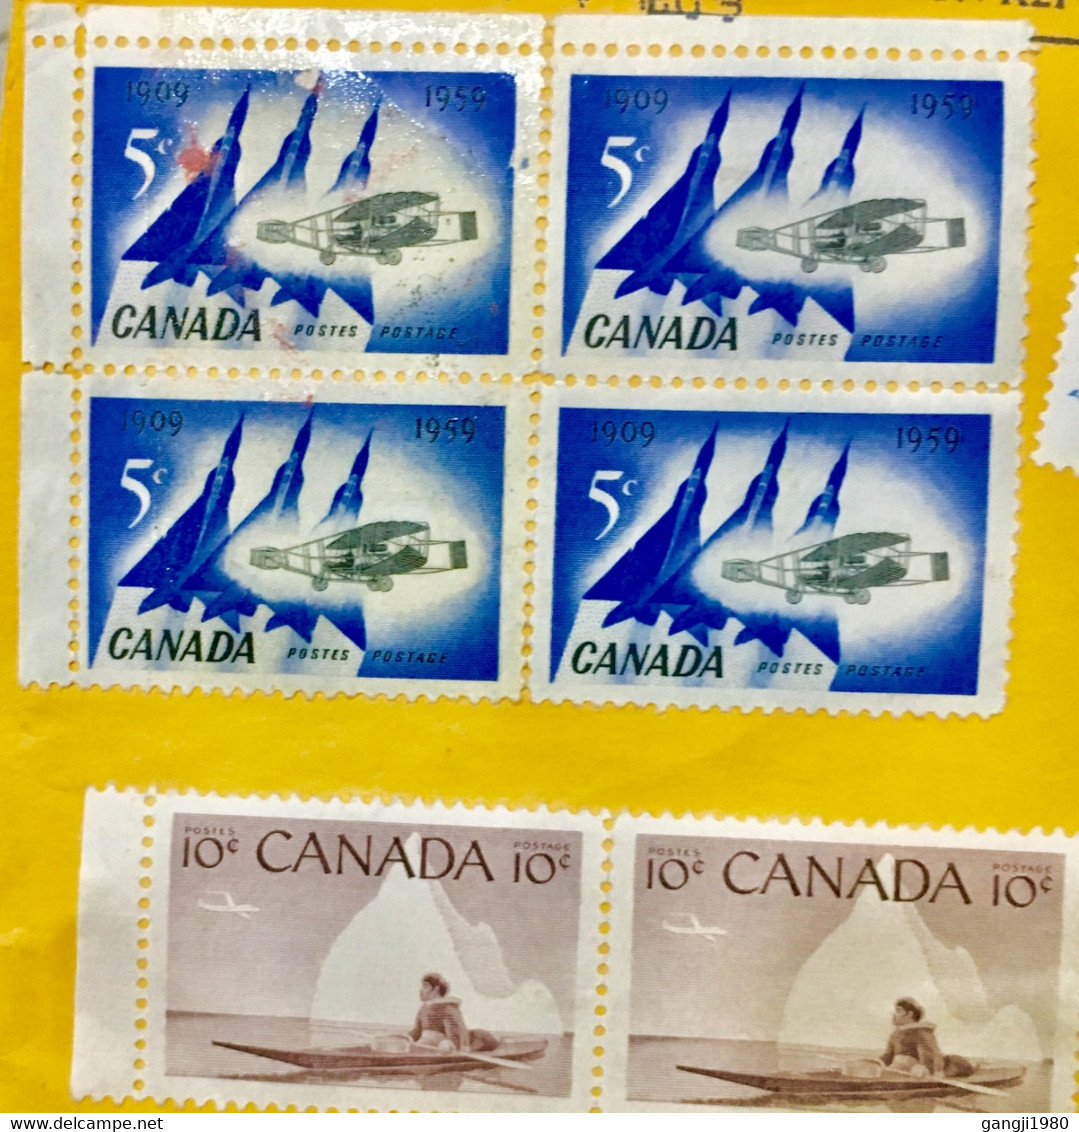 CANADA 2008, COVER 31 STAMPS ALL WITHOUT CANCELLATION ,BOOKLET PANE ,BLOCK ,FLOWER SHIP ,AEROPLANE ,CHIRSTMAS ,BOAT RACE - Storia Postale